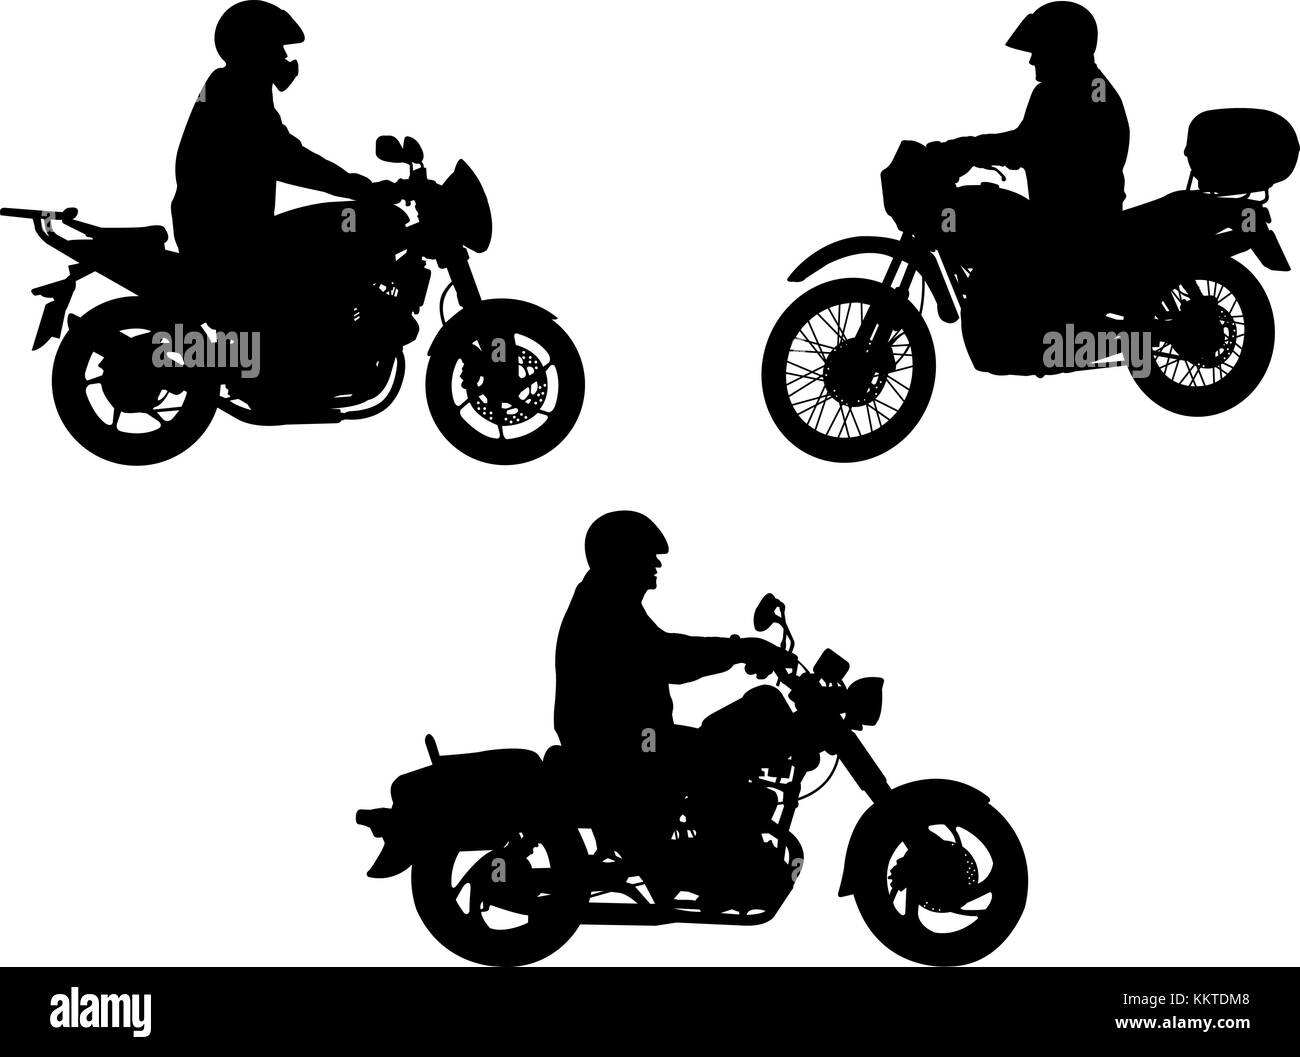 motorcyclists silhouettes - vector Stock Vector